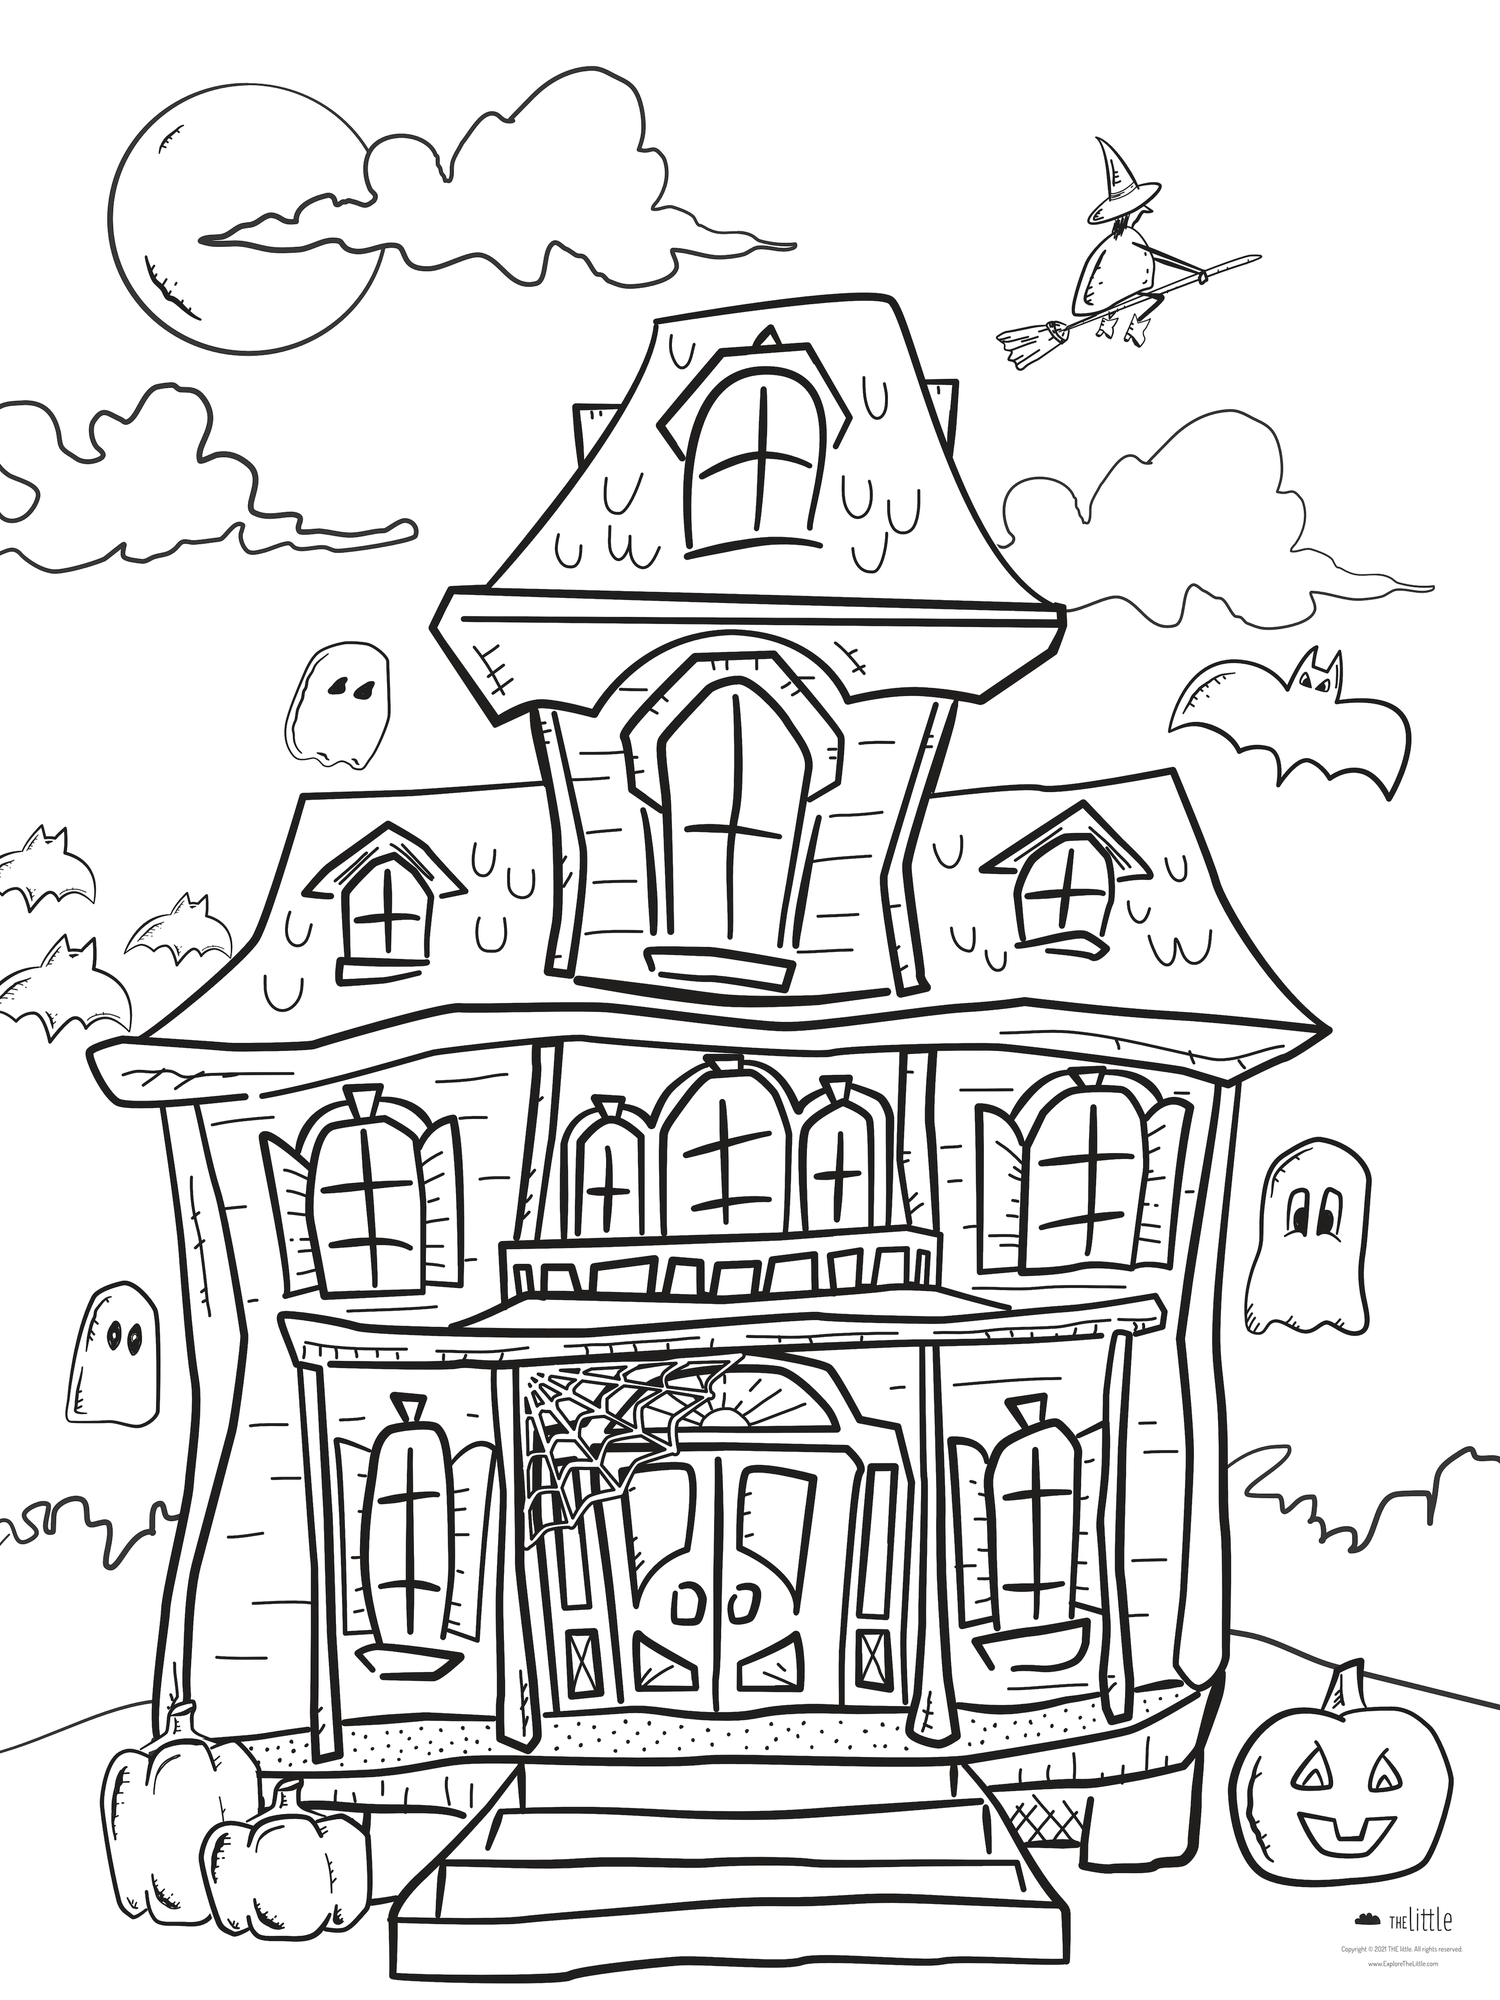 Giant Haunted House Coloring Page [Digital Download] — THE little